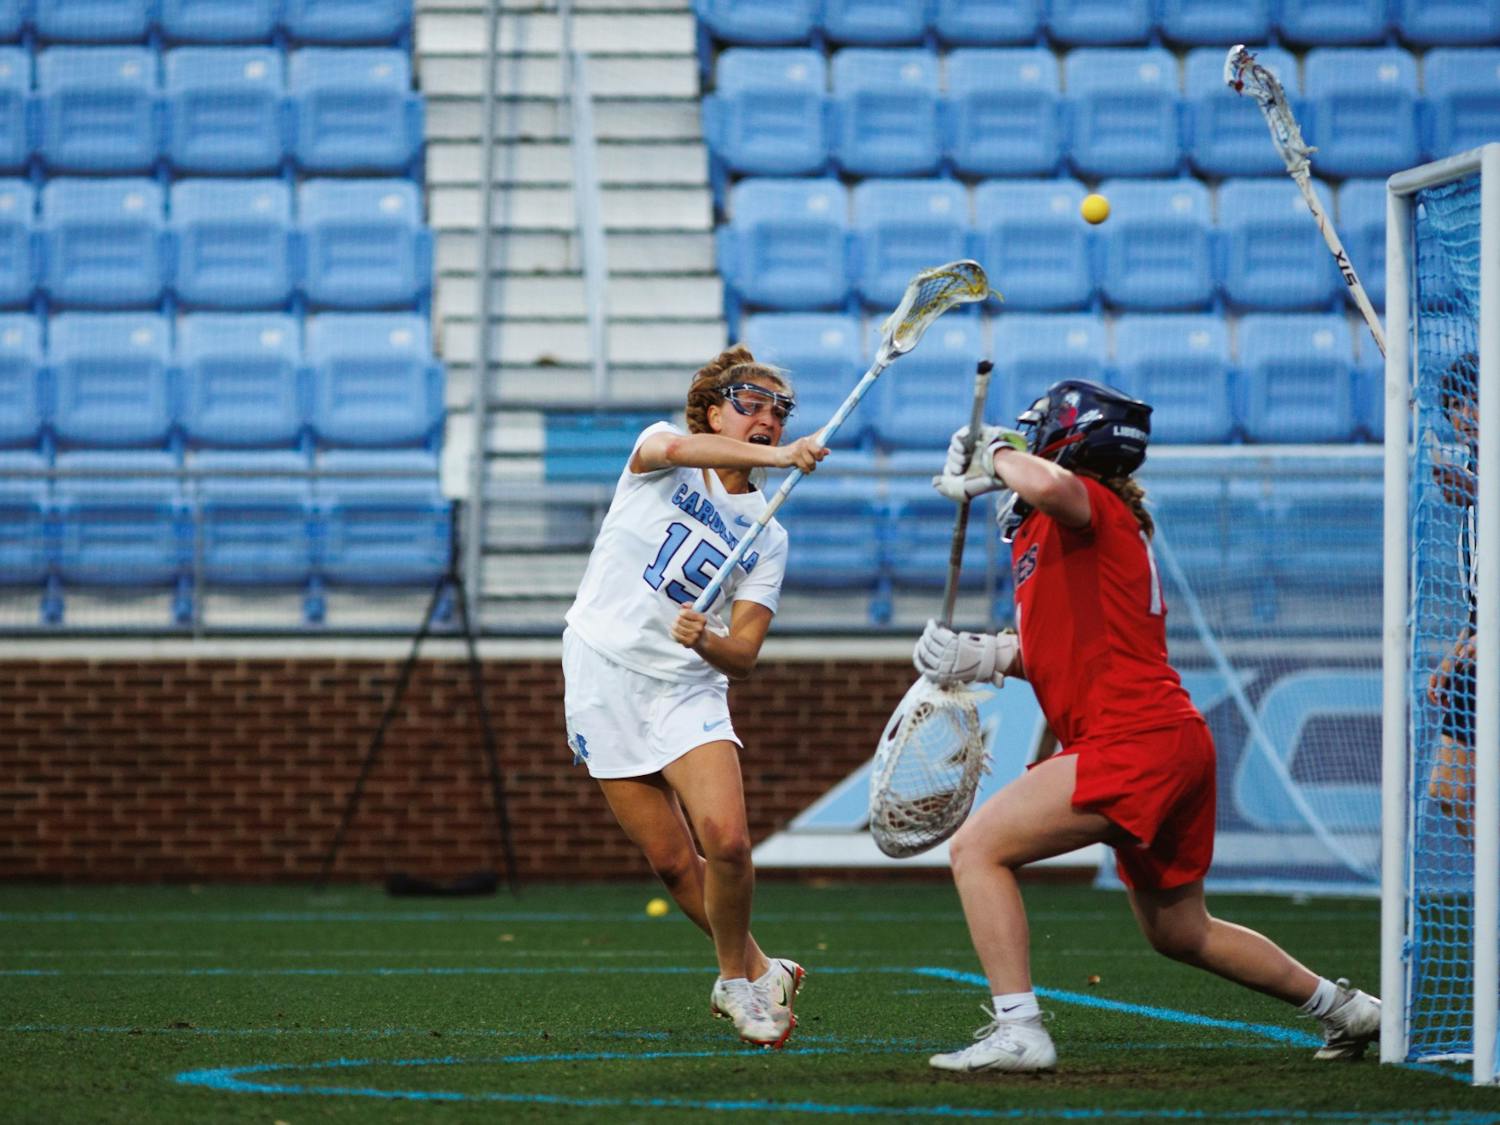 UNC attacker Caitlyn Wurzburger (15) scores during the second quarter of the women's lacrosse match against Liberty. UNC led 11-4 at half at Dorrance Field. Photographed on Wednesday, Feb. 15, 2023.